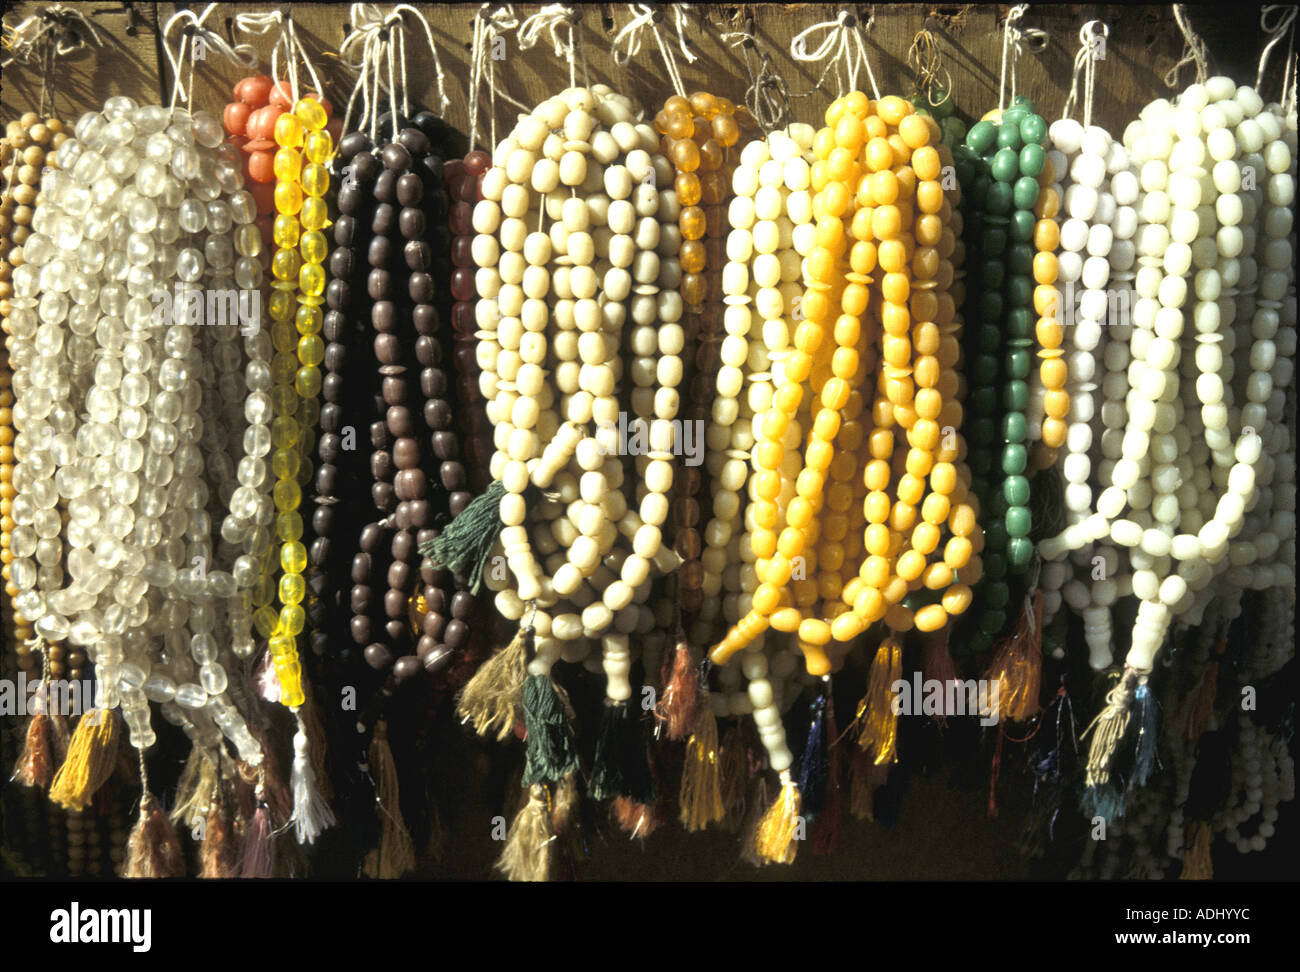 corn beads for sale